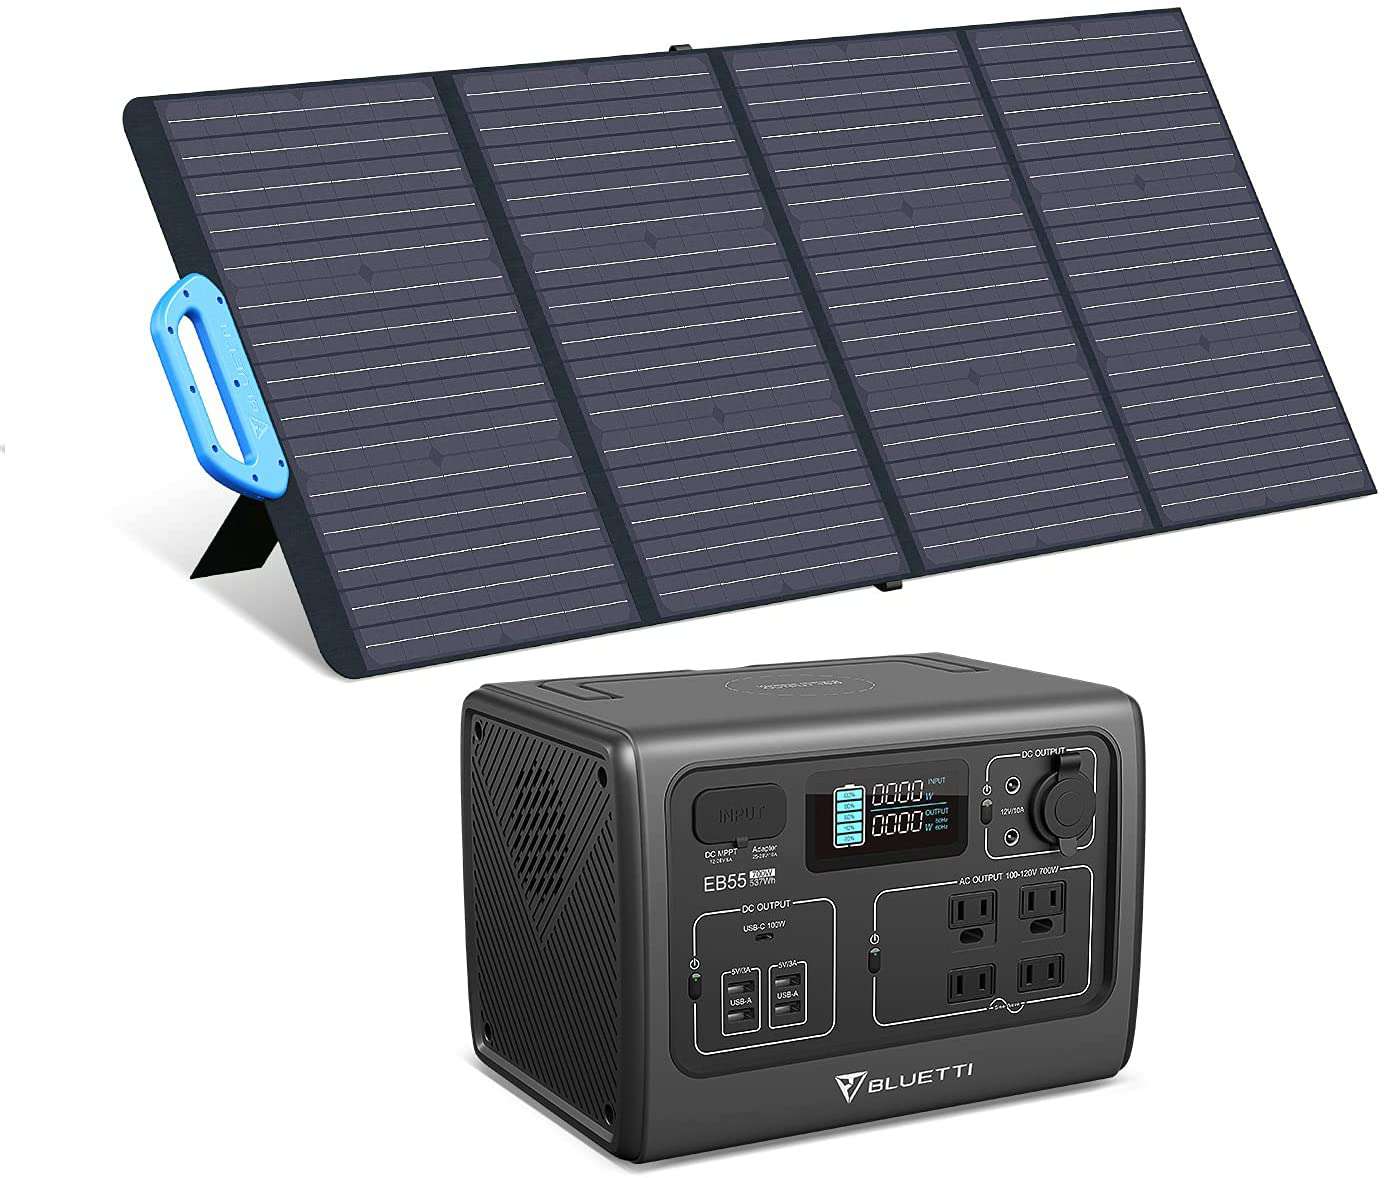 Solar battery charger.